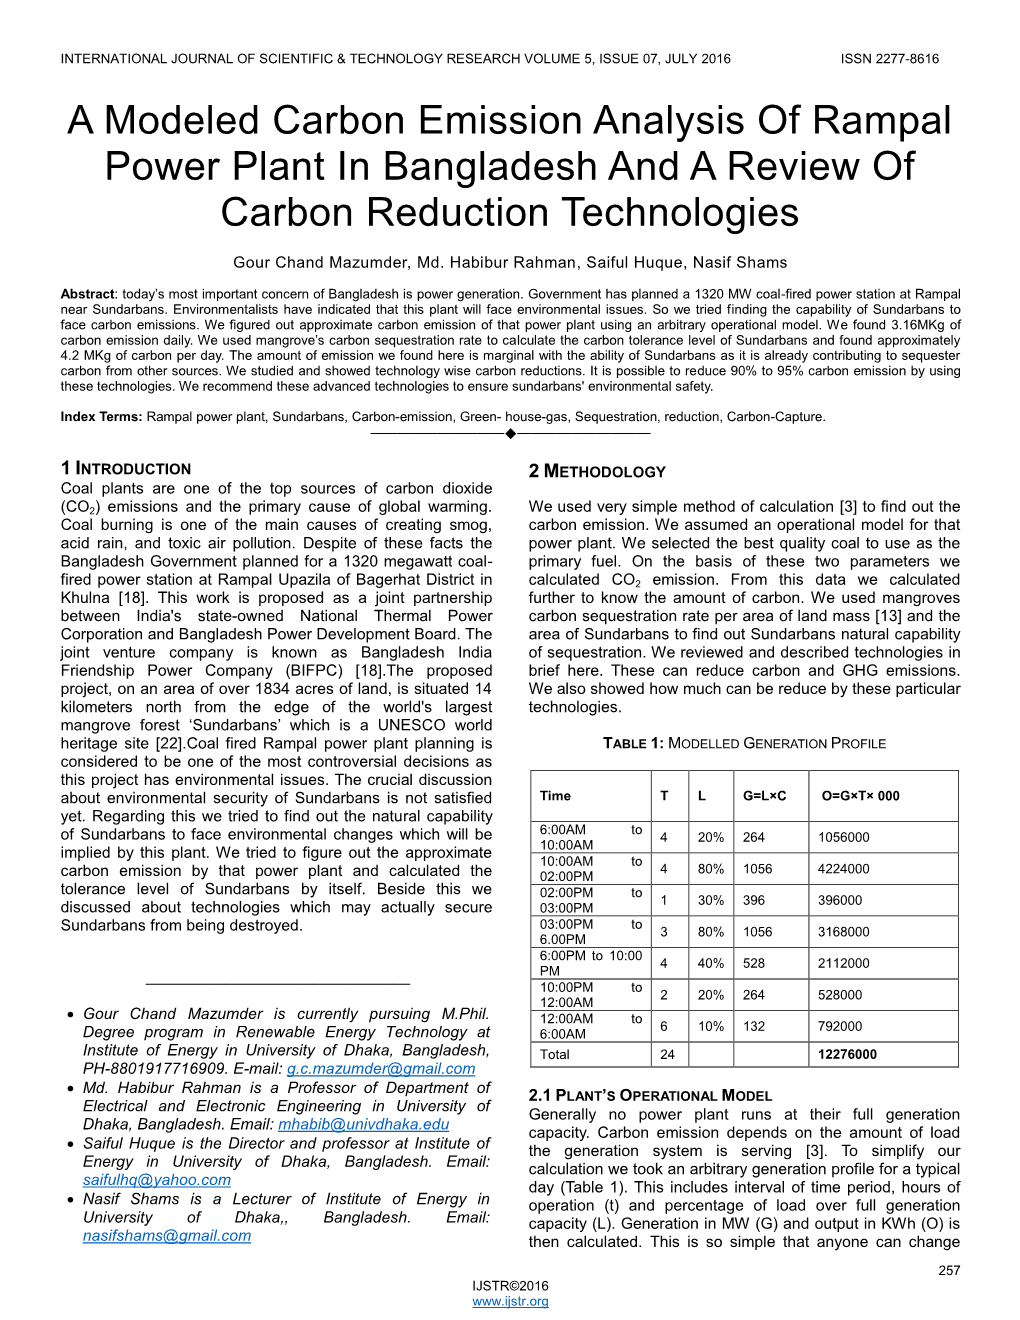 A Modeled Carbon Emission Analysis of Rampal Power Plant in Bangladesh and a Review of Carbon Reduction Technologies